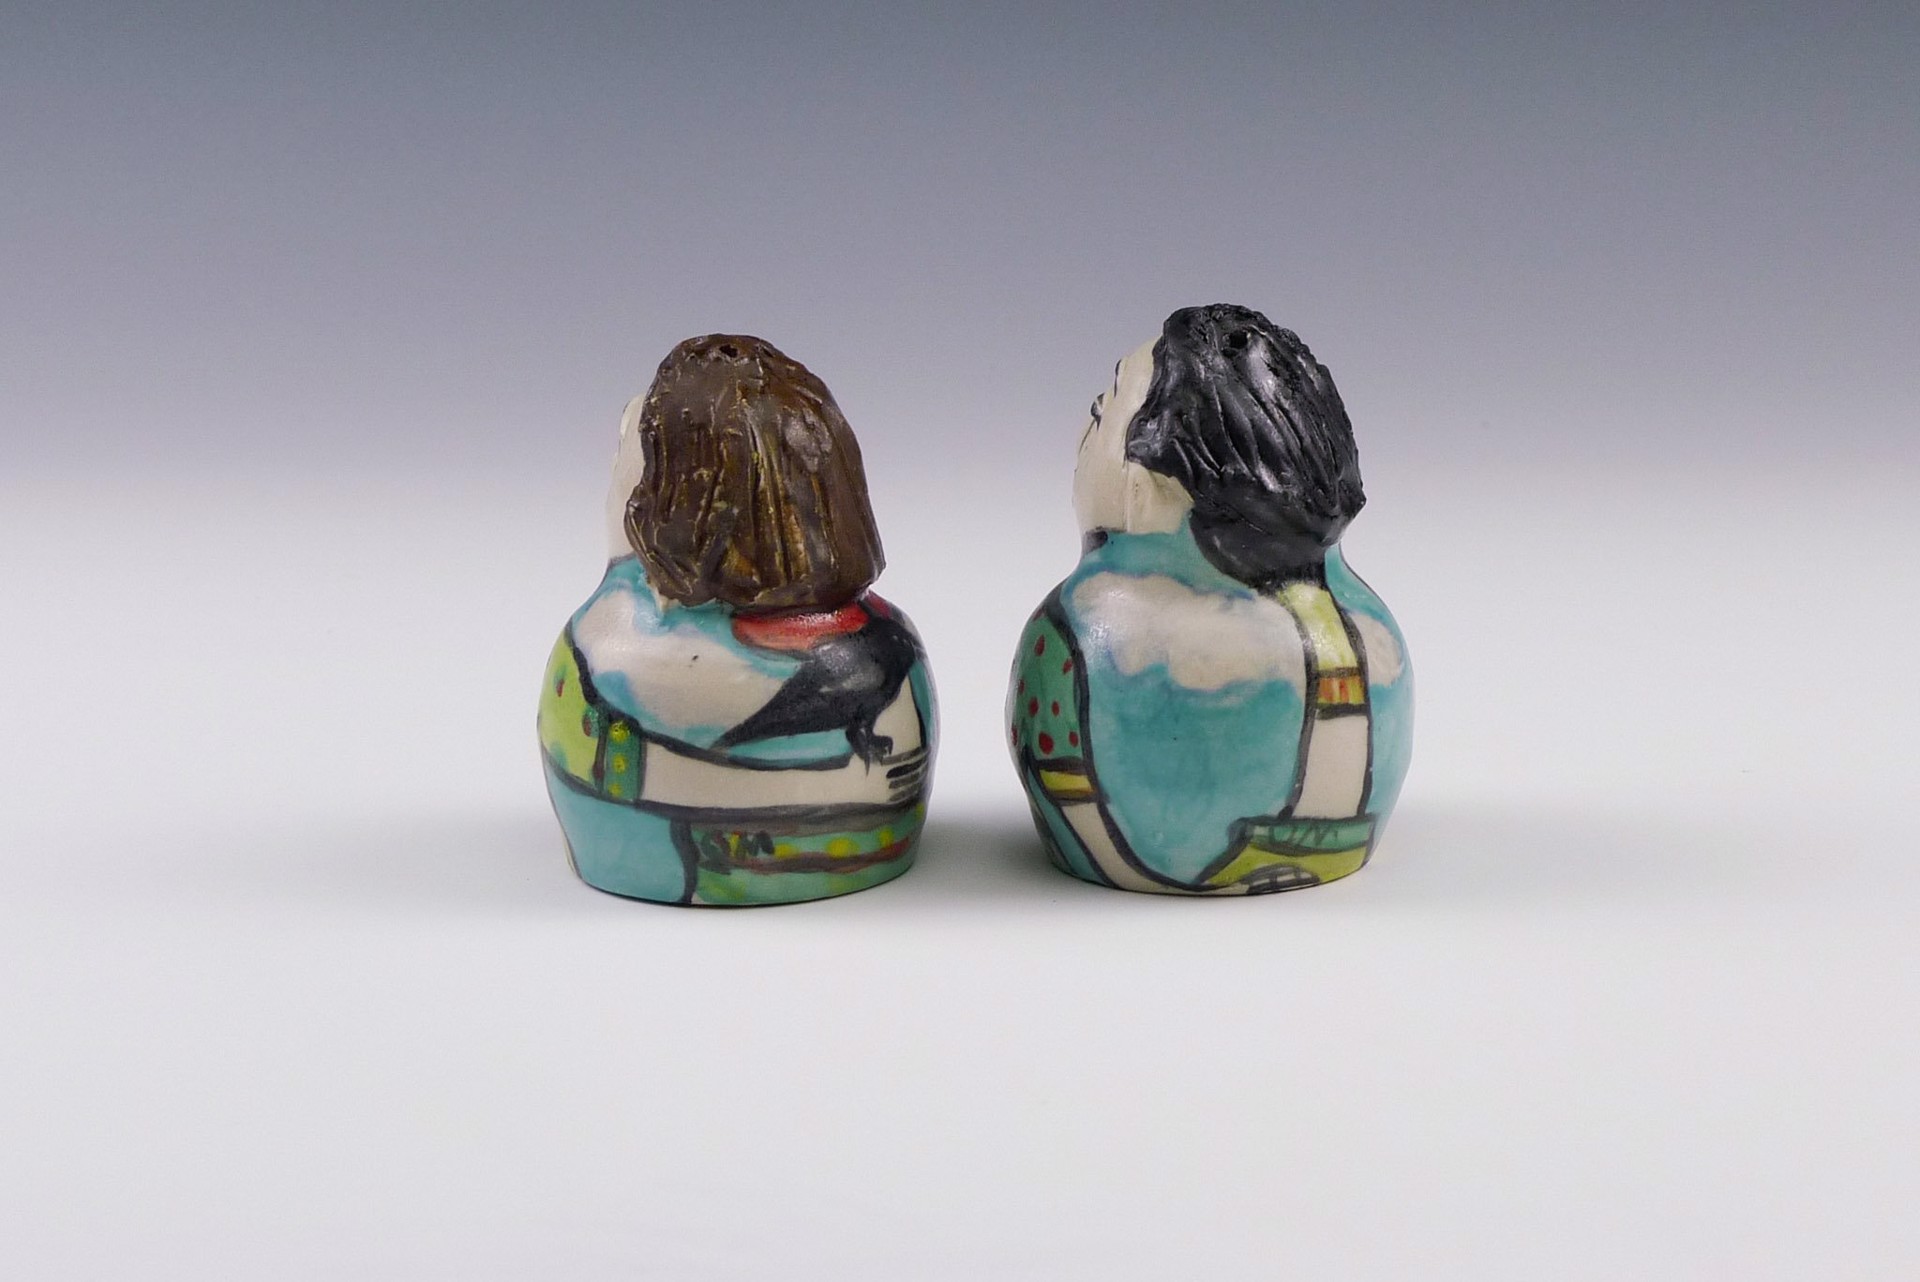 Salt and Pepper Couple by Wendy Olson